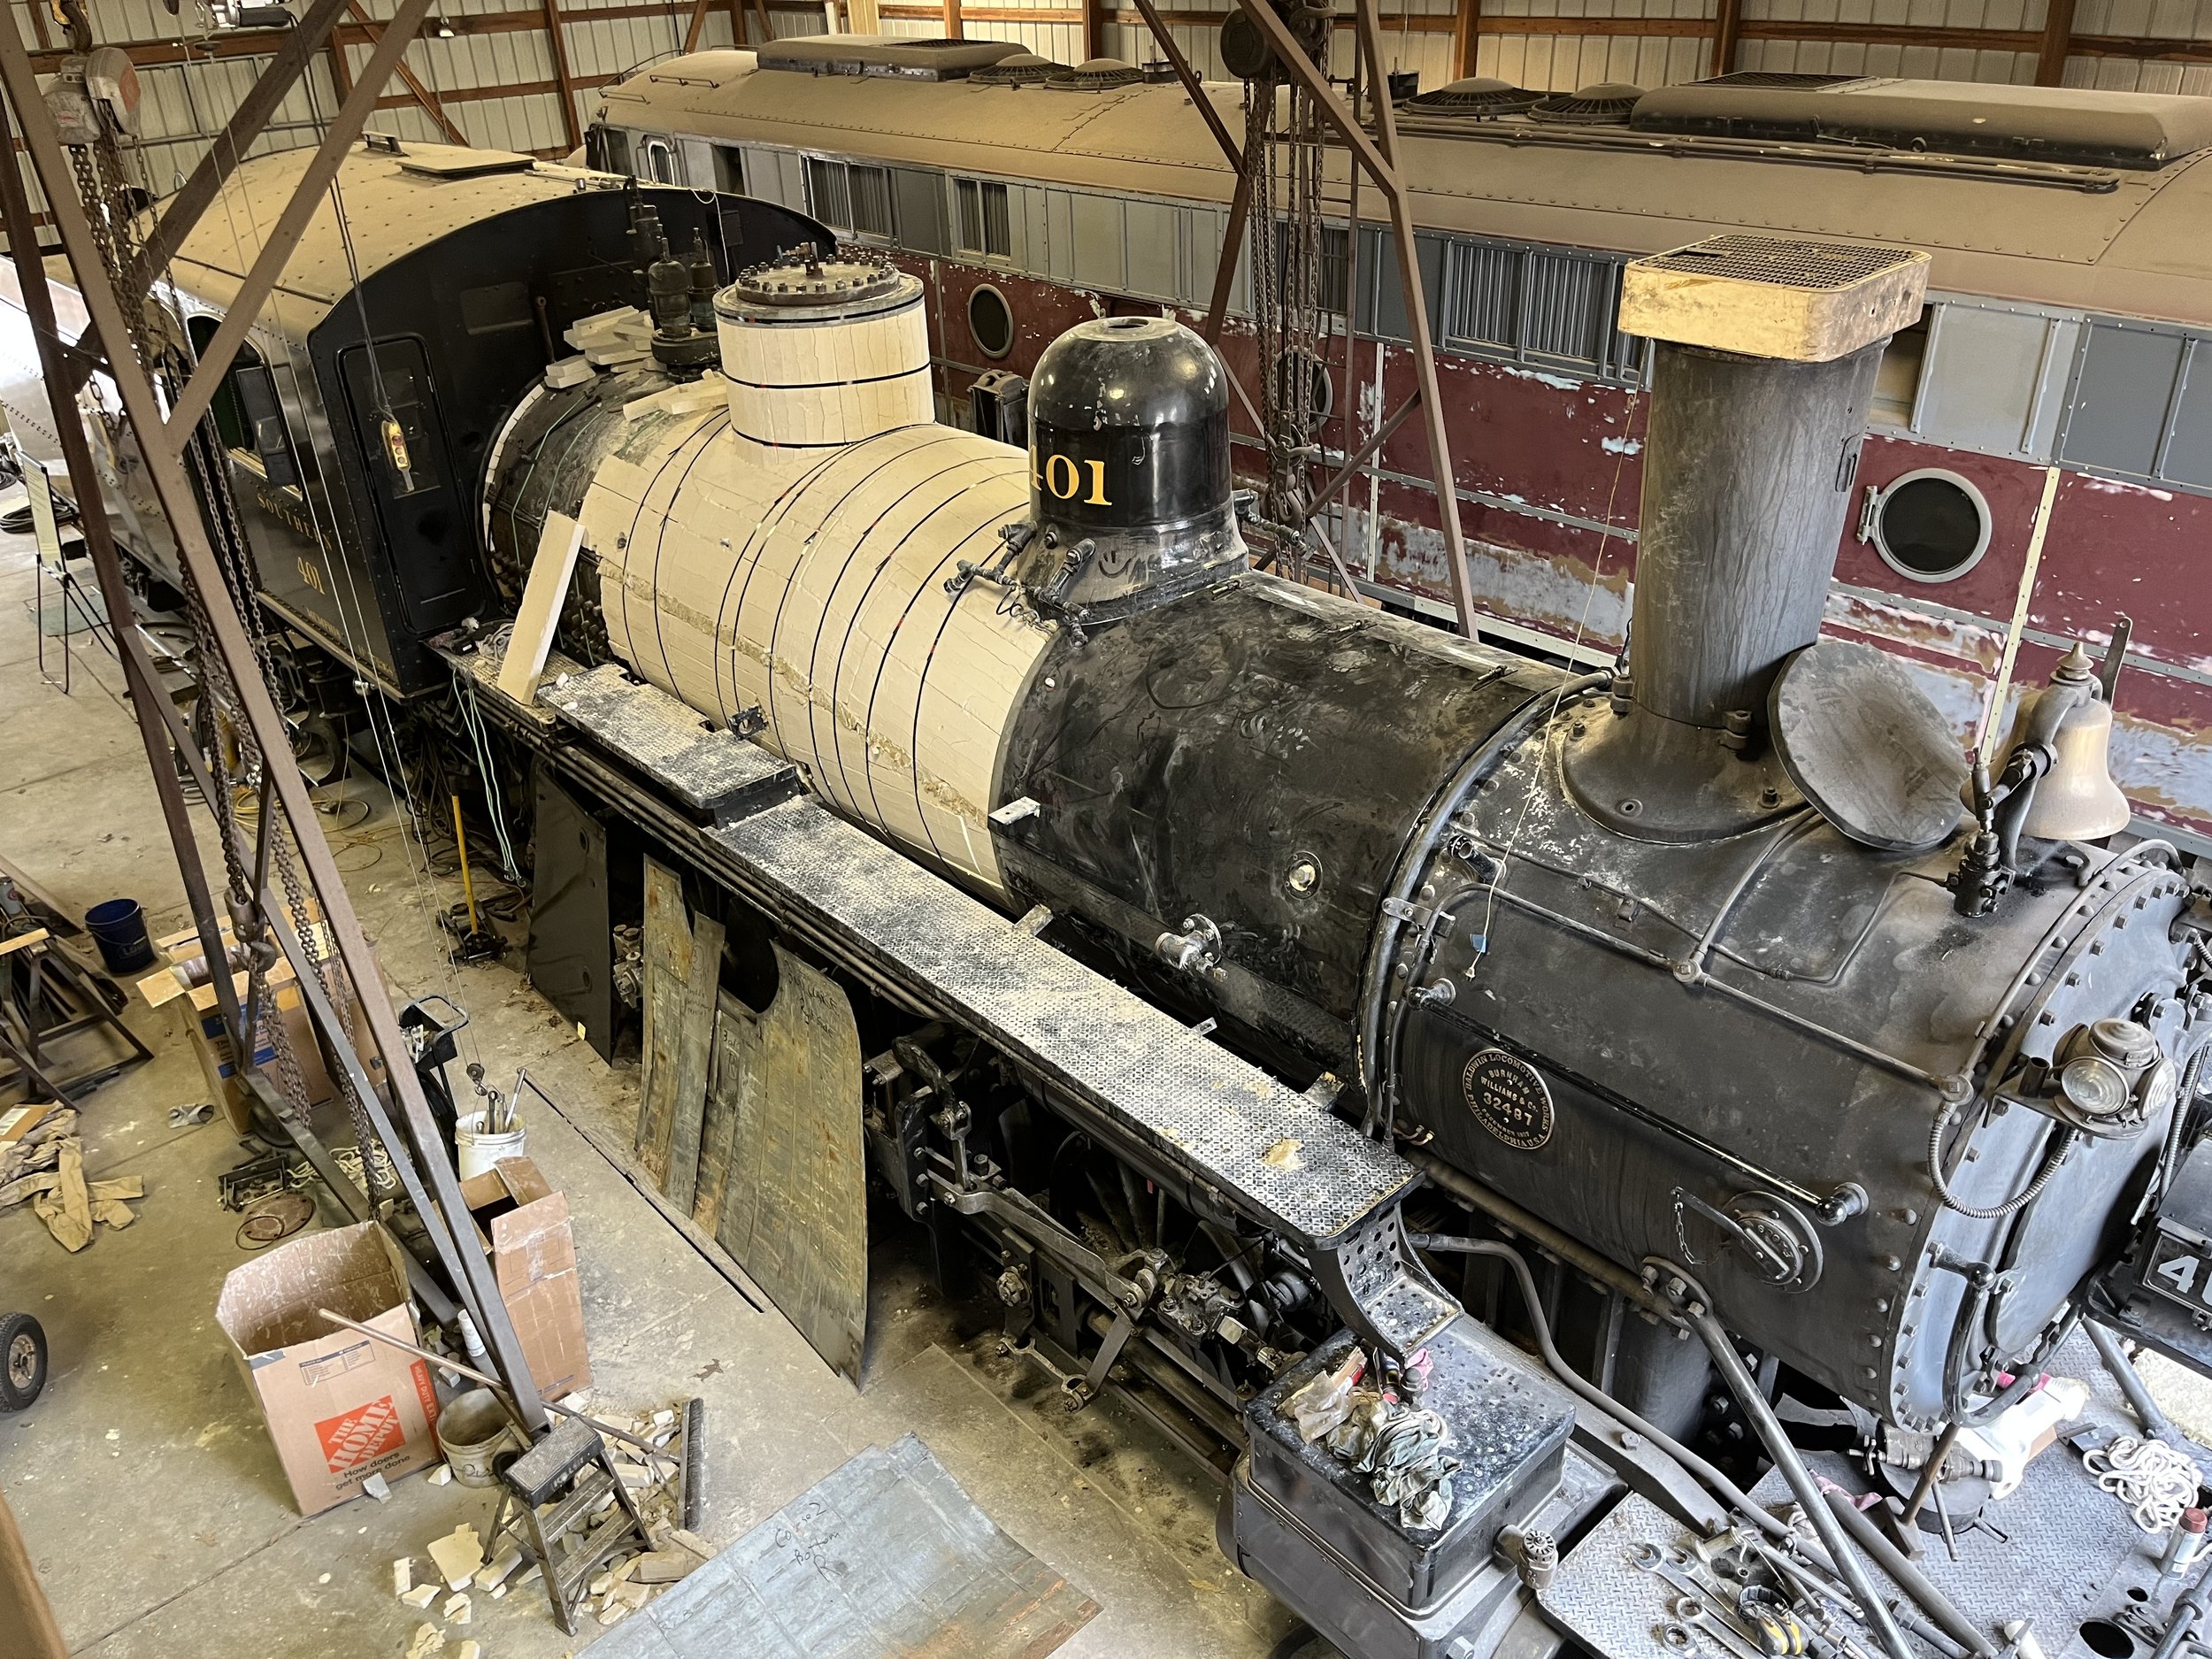  Once the work on the interior of the boiler is complete, volunteers begin to install new lagging insulation on the boiler. Once the lagging is installed, the jacketing will be reinstalled on top of the lagging.  